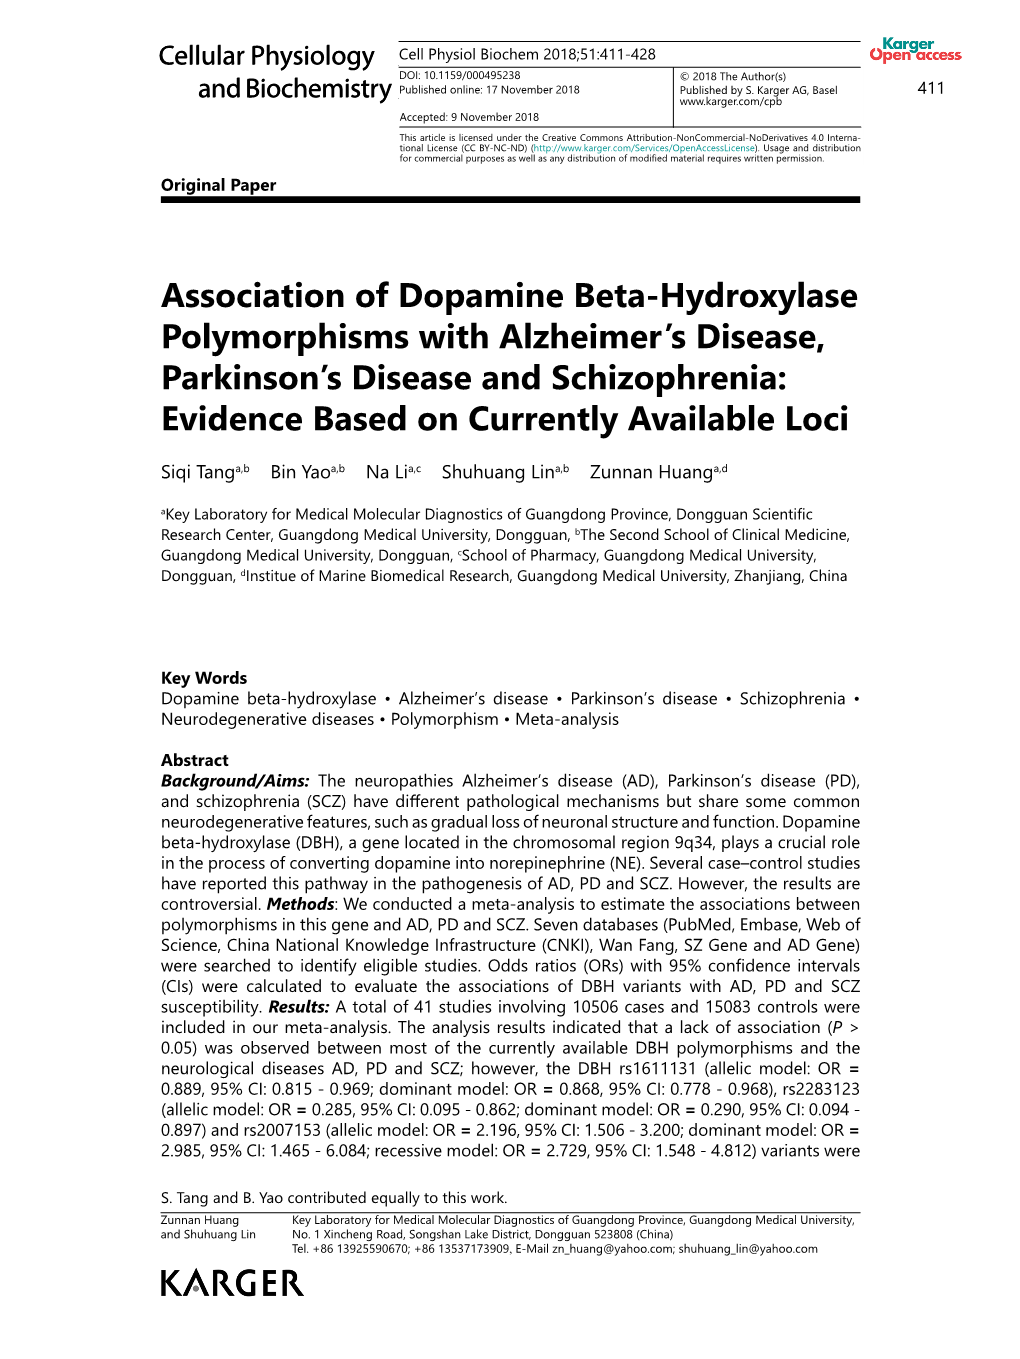 Association of Dopamine Beta-Hydroxylase Polymorphisms with Alzheimer’S Disease, Parkinson’S Disease and Schizophrenia: Evidence Based on Currently Available Loci